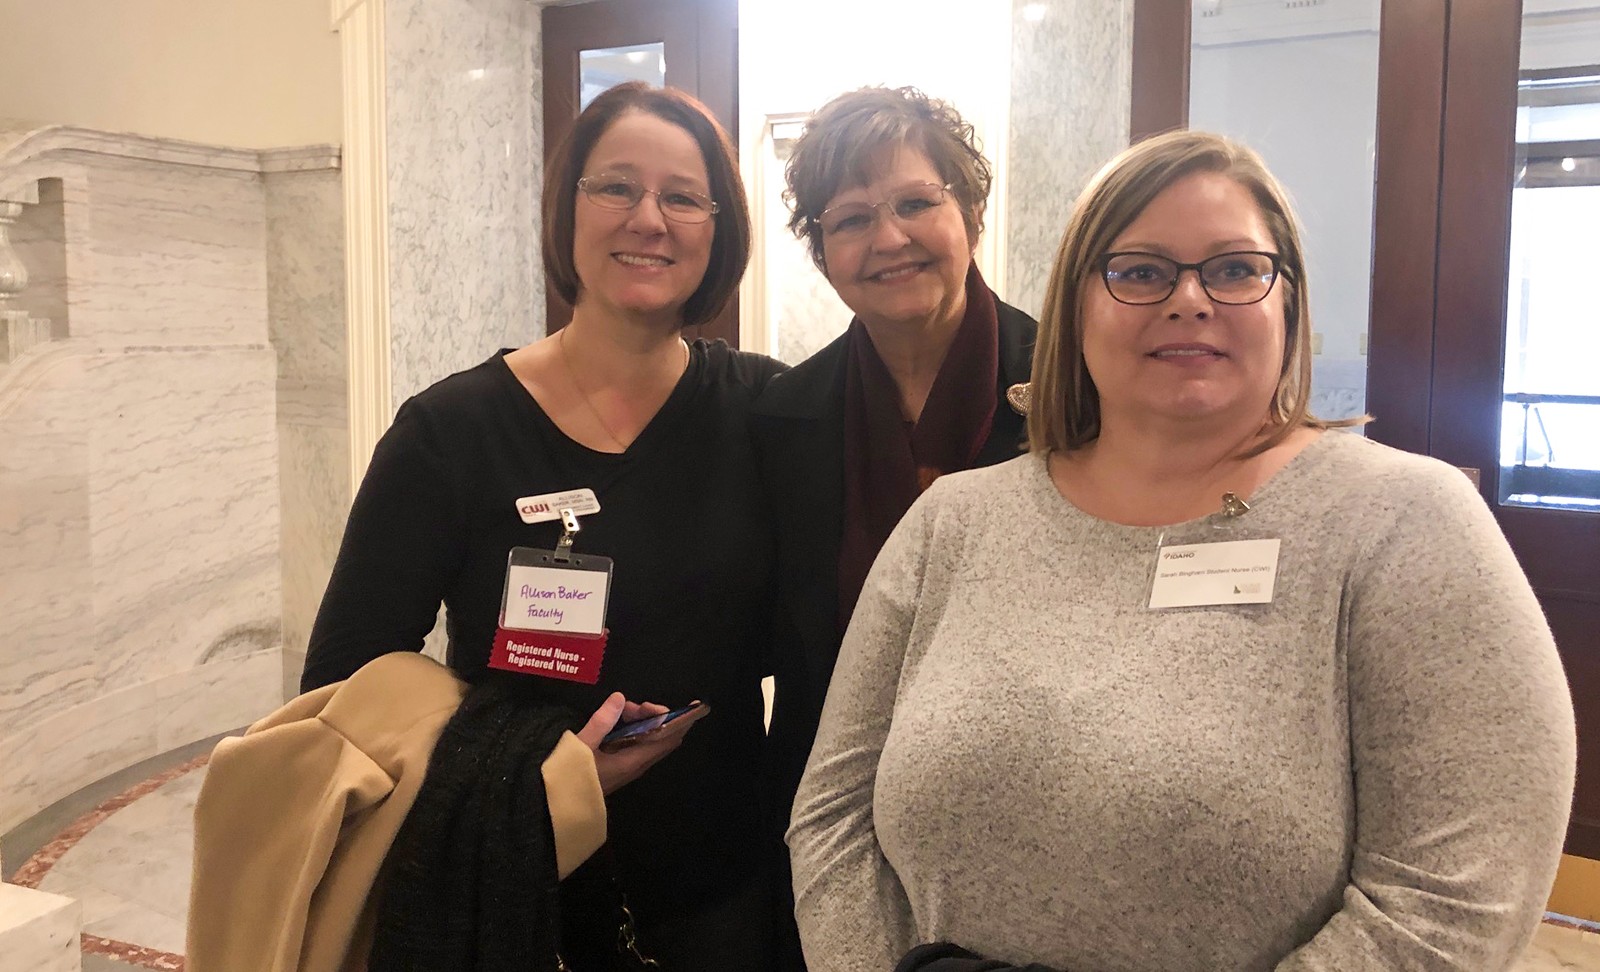 Allison Baker, name, and Sarah Bingham at Nurses Day at the Capitol on Feb. 19, 2020